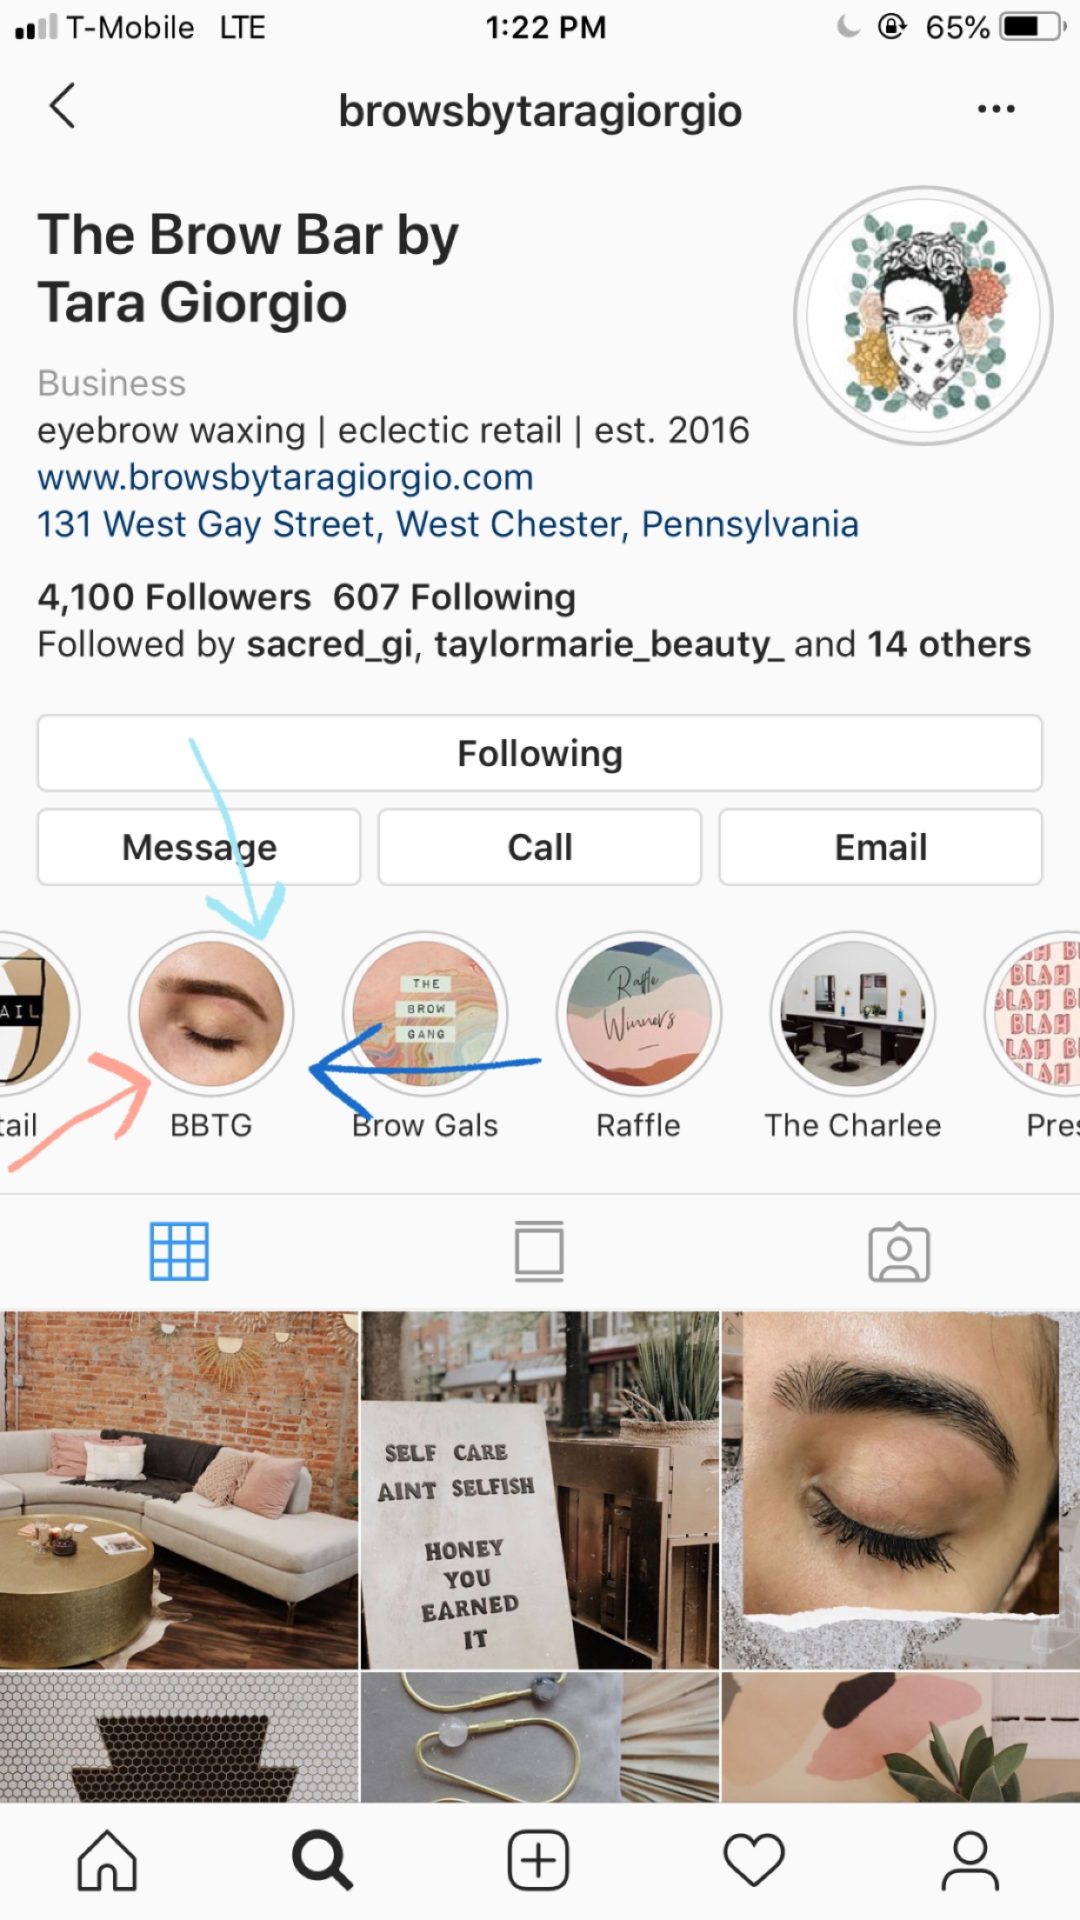 Feeds for Instagram: how you can take advantage of it